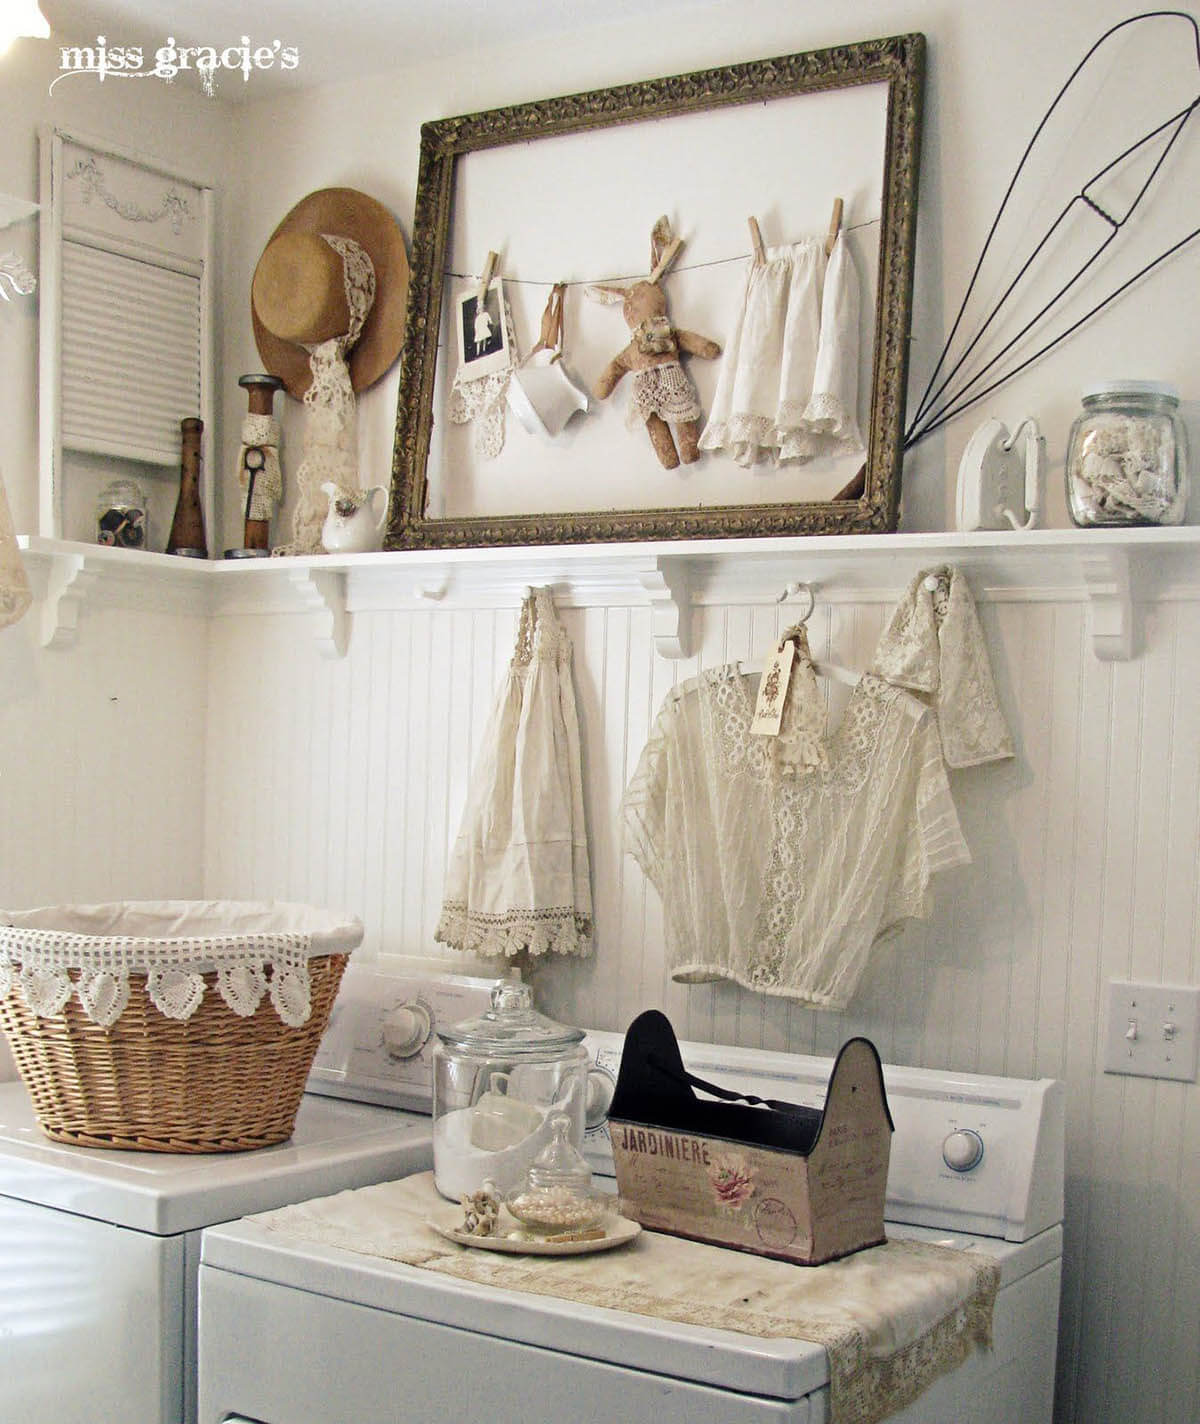 Do It Yourself Ideas for A Vintage Laundry Room| Laundry Room, Vintage Laundry Room, Laundry Room Decor, DIY Home, DIY Room Decor, DIY Laundry Room, Vintage, Vintage Home Decor, Popular Pin #Vintage #DIYHome